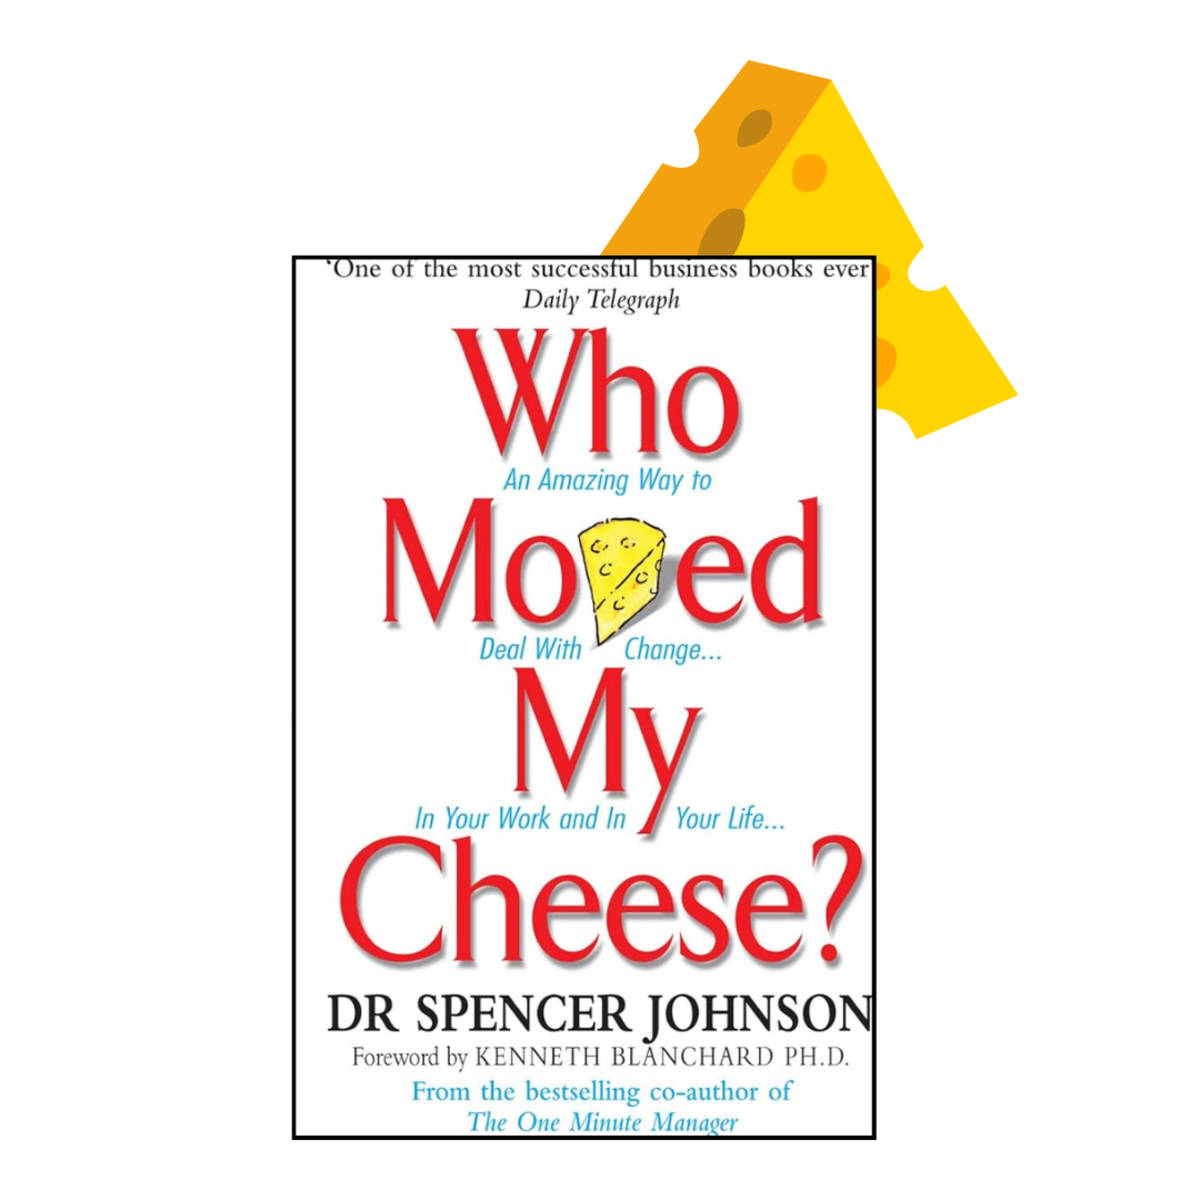 6 valuable lessons learned from the book “Who moved my cheese?”